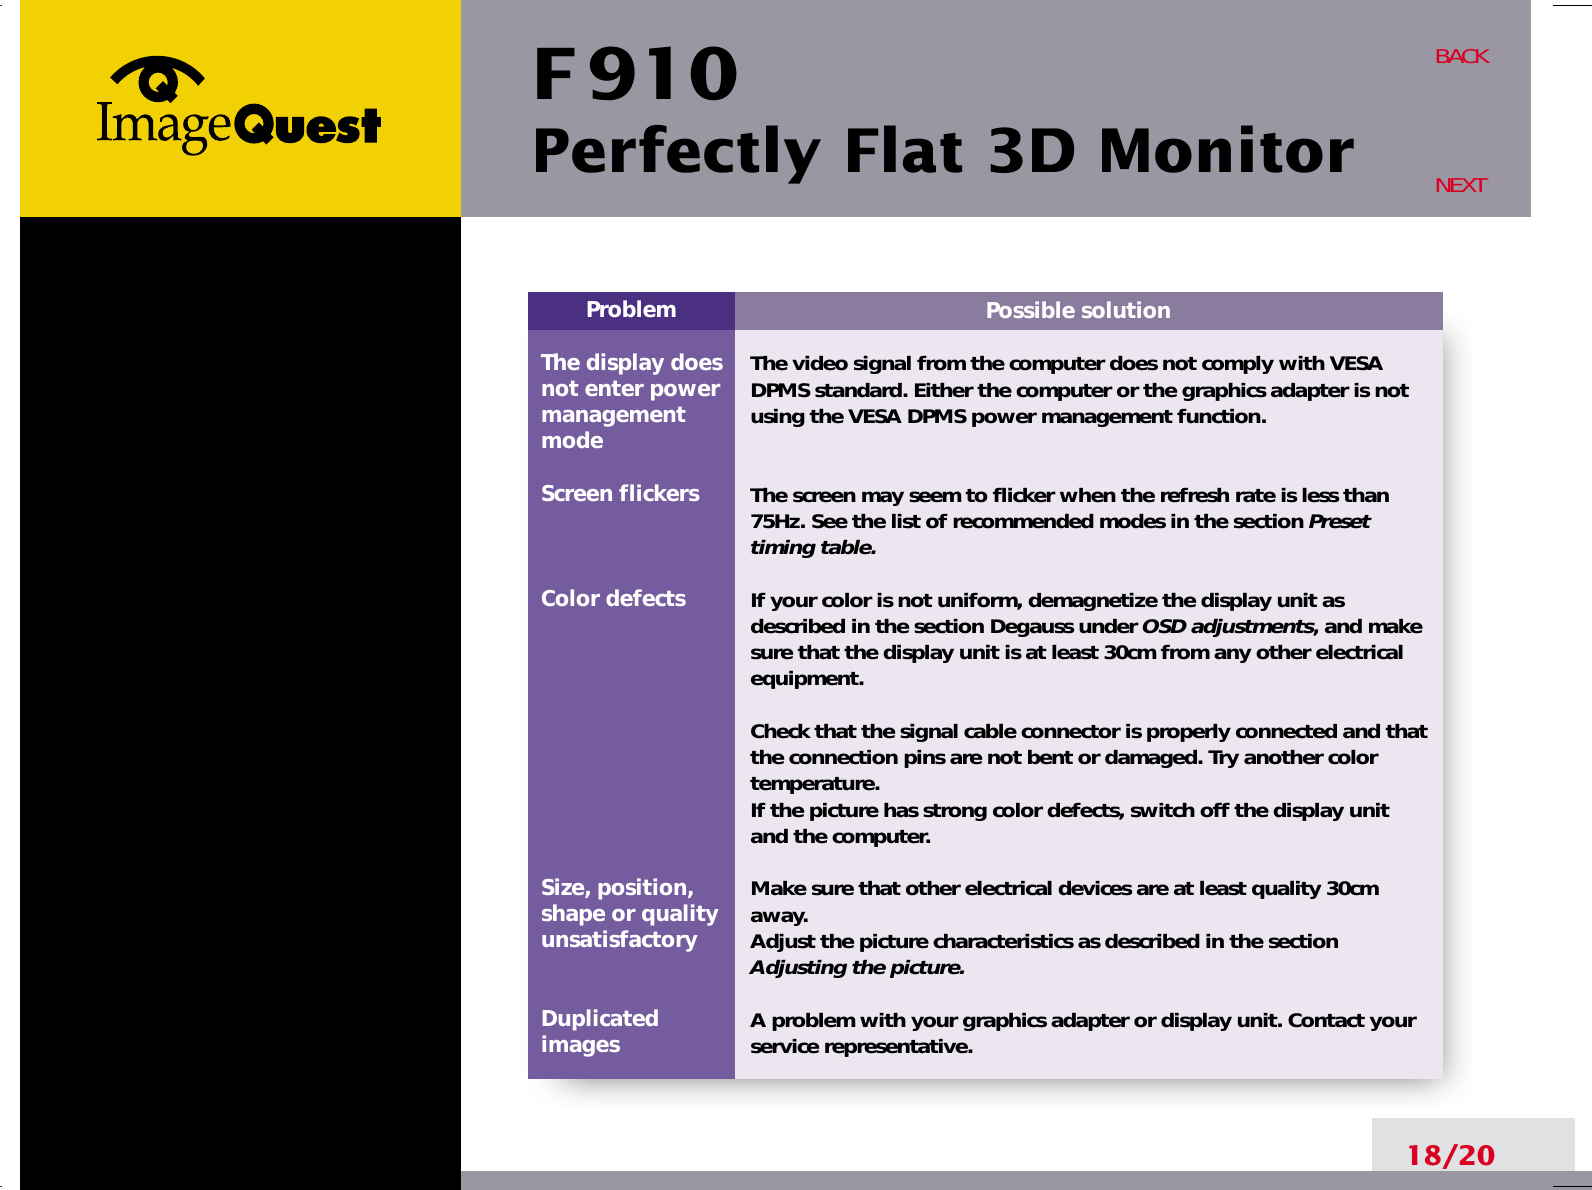 F 910Perfectly Flat 3D Monitor18/20BACKNEXTPossible solutionThe video signal from the computer does not comply with VESADPMS standard. Either the computer or the graphics adapter is notusing the VESA DPMS power management function.The screen may seem to flicker when the refresh rate is less than75Hz. See the list of recommended modes in the section Presettiming table.If your color is not uniform, demagnetize the display unit asdescribed in the section Degauss under OSD adjustments, and makesure that the display unit is at least 30cm from any other electricalequipment.Check that the signal cable connector is properly connected and thatthe connection pins are not bent or damaged. Try another colortemperature. If the picture has strong color defects, switch off the display unitand the computer.Make sure that other electrical devices are at least quality 30cmaway.Adjust the picture characteristics as described in the sectionAdjusting the picture.A problem with your graphics adapter or display unit. Contact yourservice representative.ProblemThe display does not enter power managementmodeScreen flickersColor defectsSize, position,shape or qualityunsatisfactoryDuplicatedimages